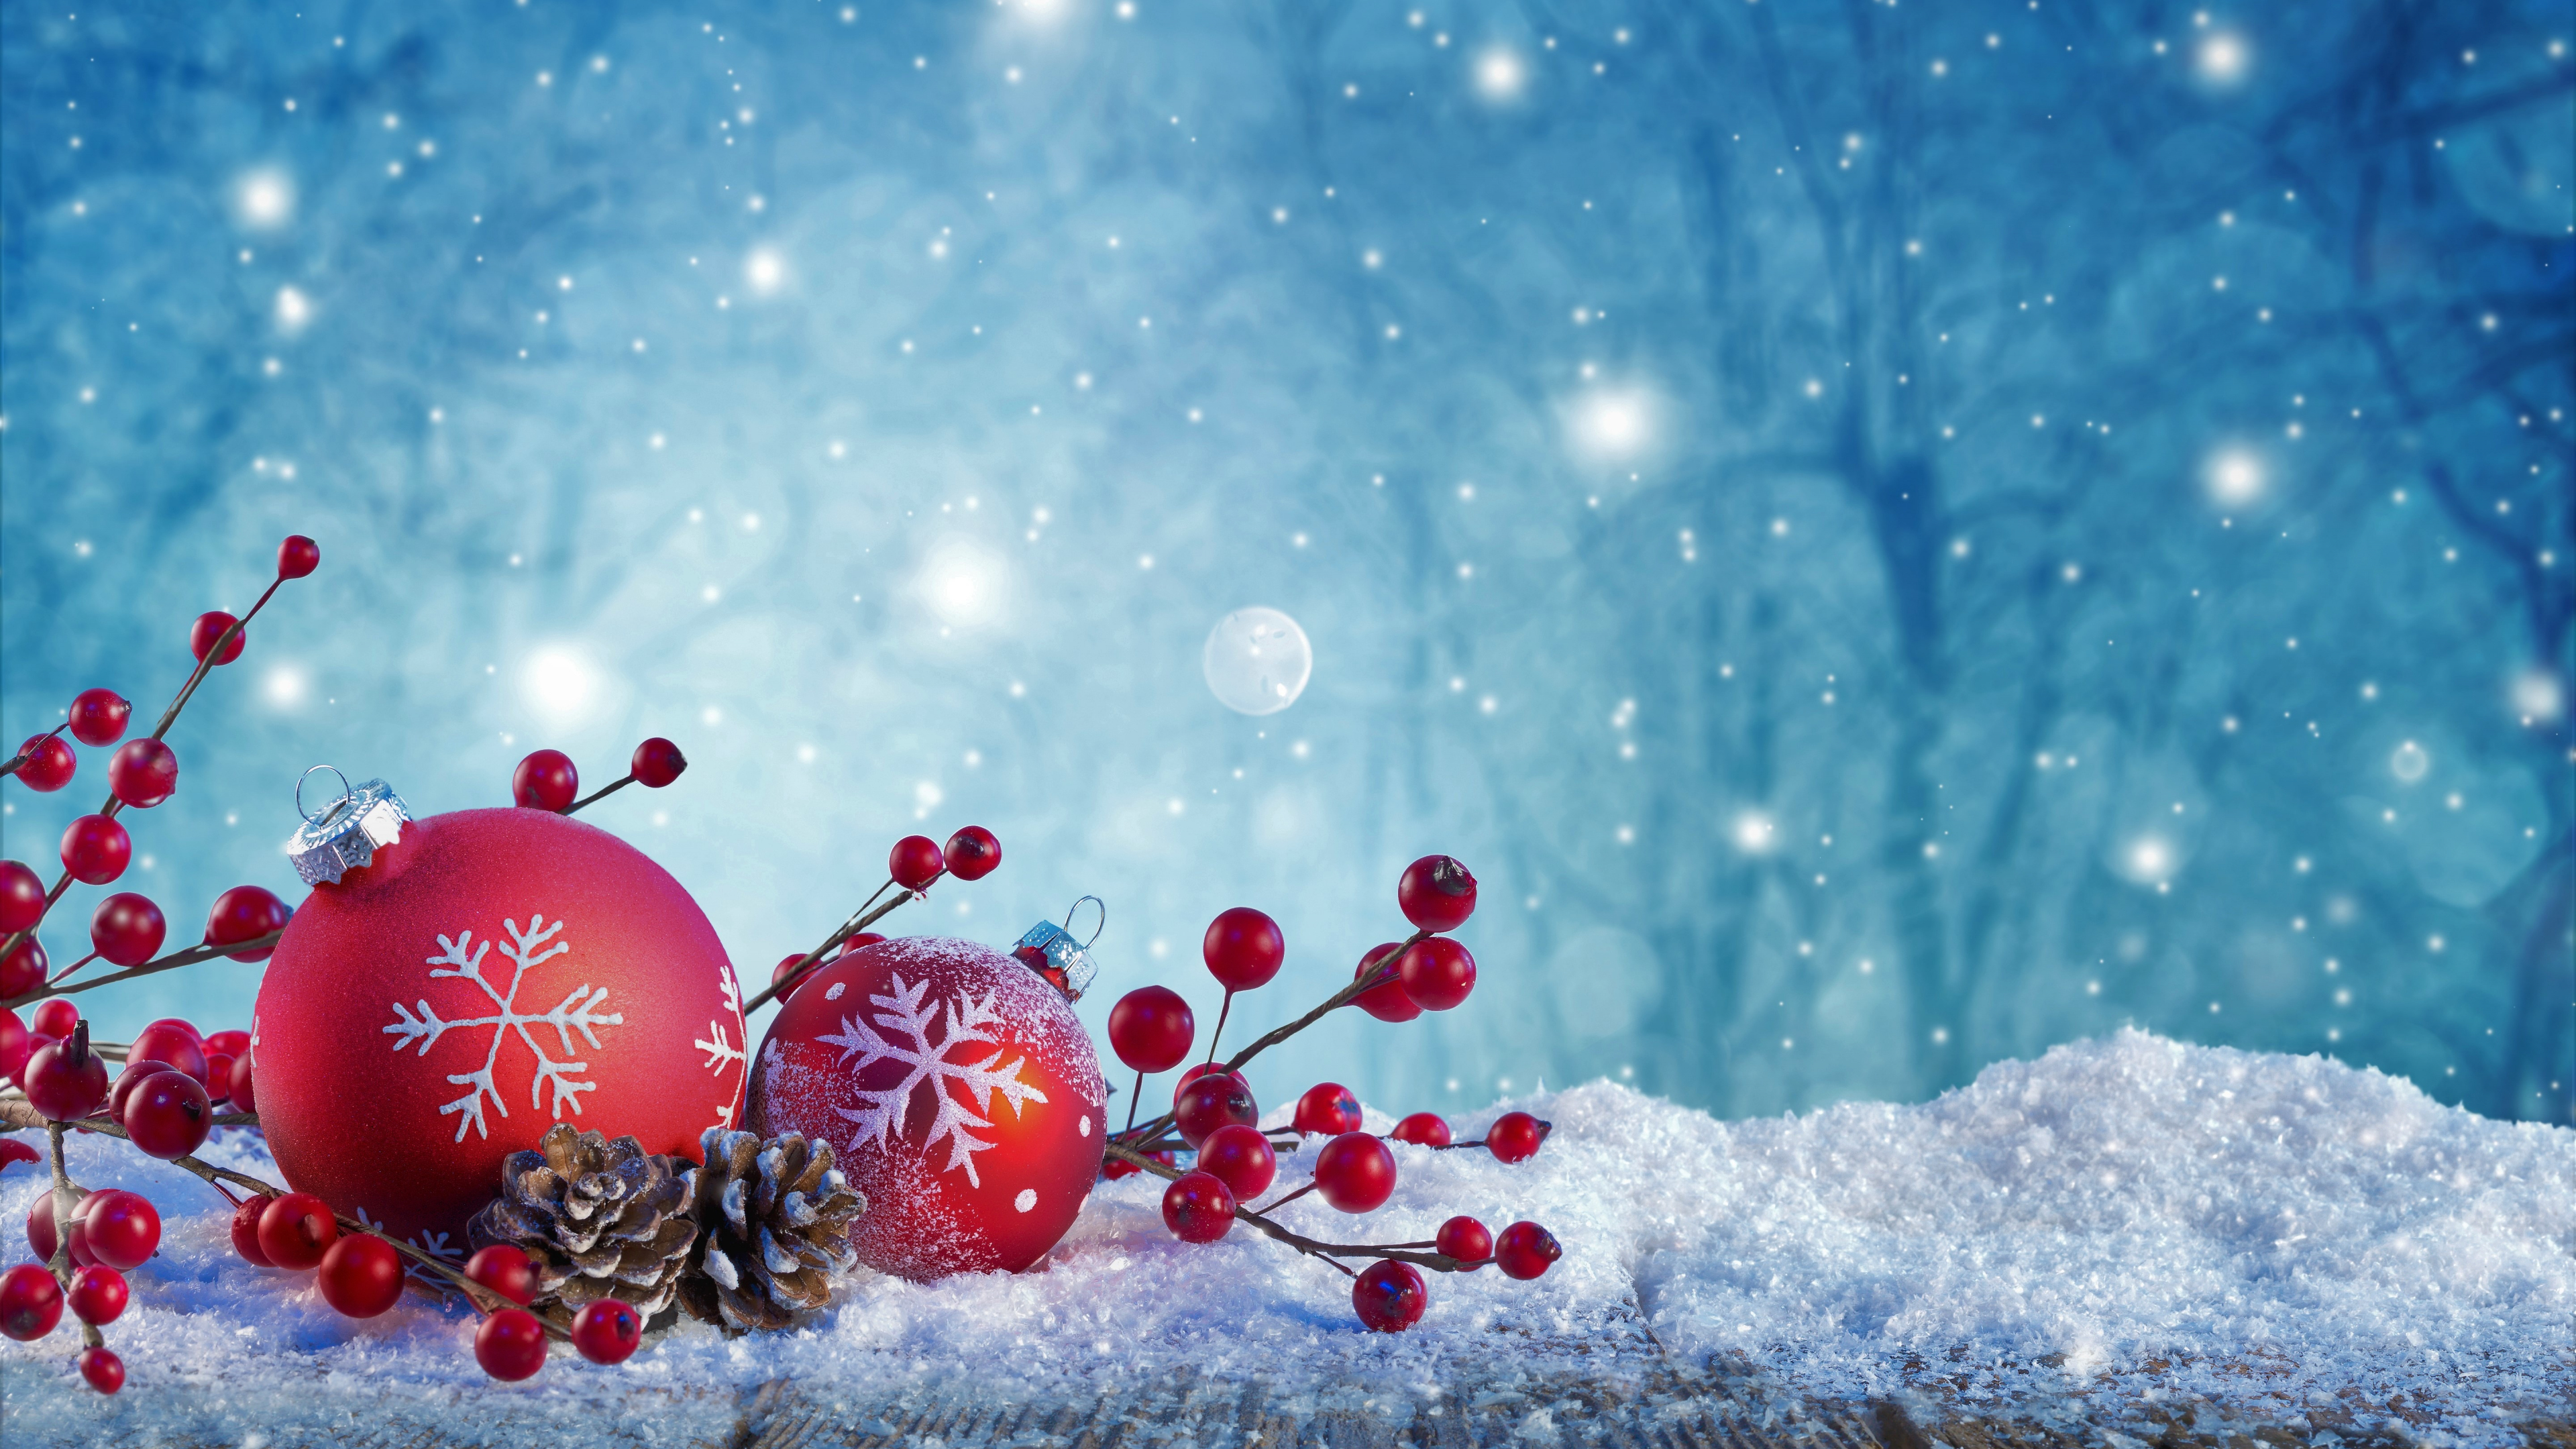 Download 3840x2160 wallpaper christmas, ornaments, decorations, holiday ...